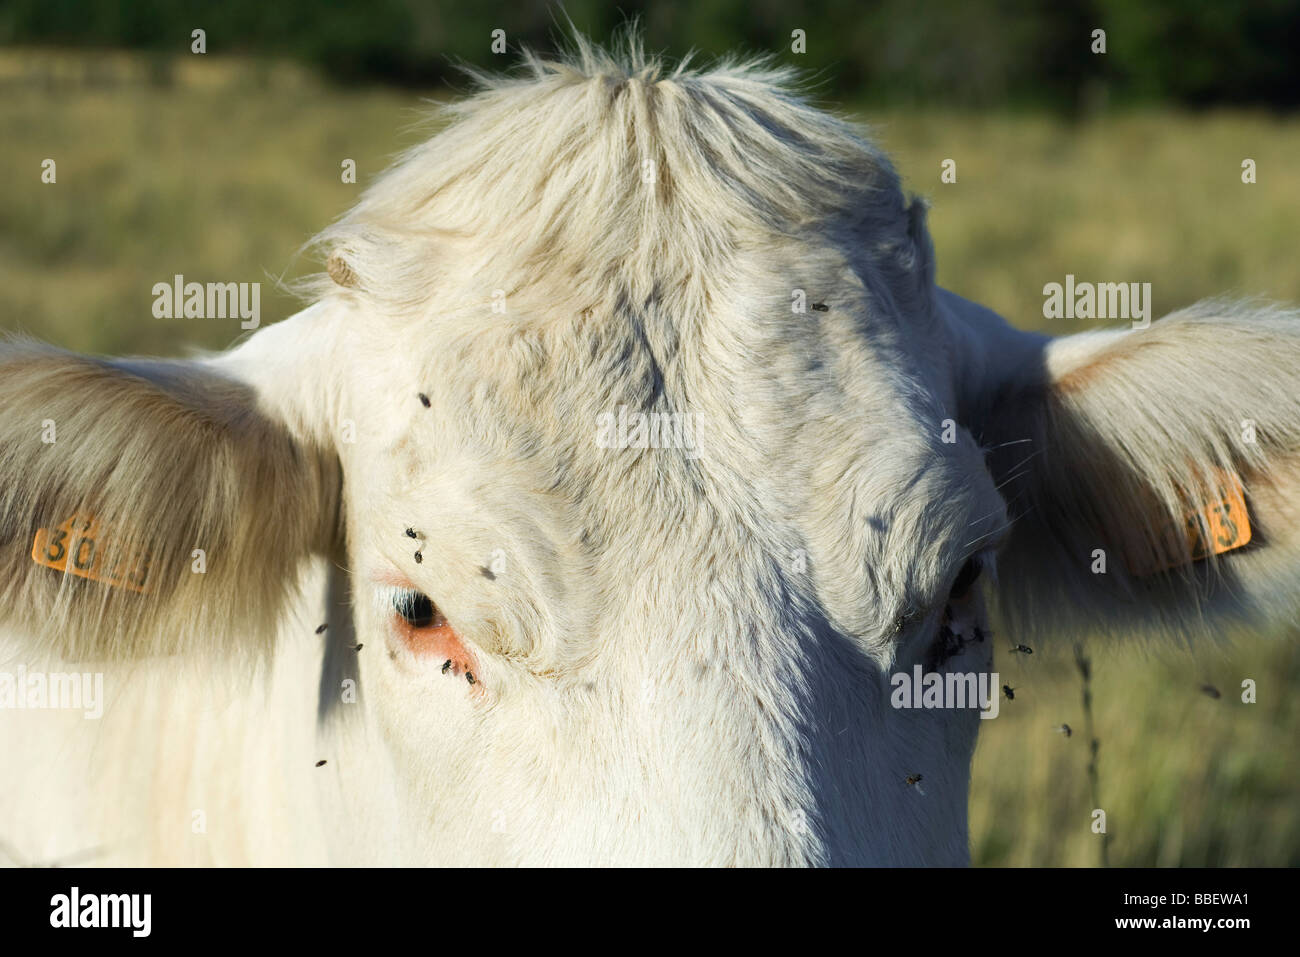 White cow with flies buzzing around its face, close-up Stock Photo